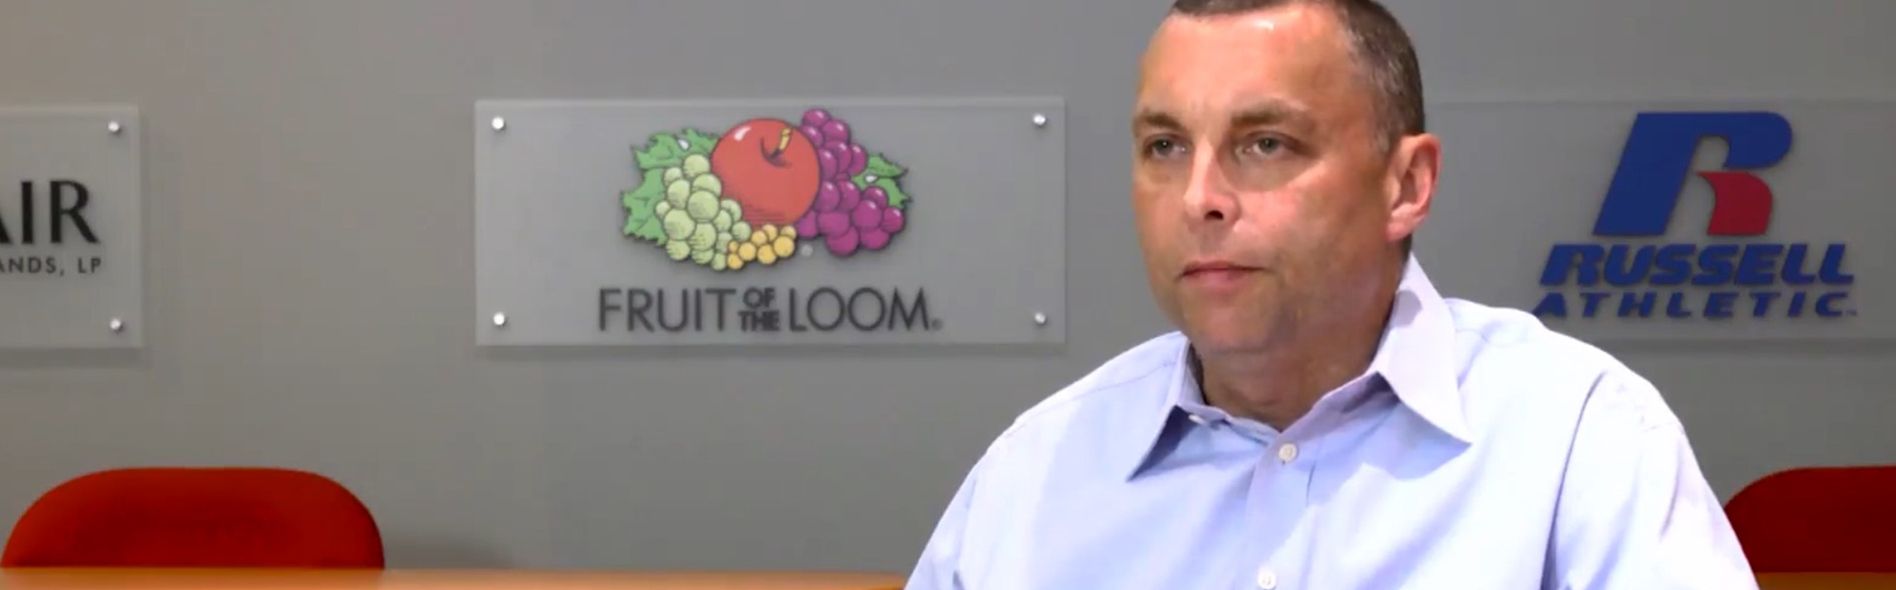 Fruit of the Loom: Weaving best-in-class IT with the future of the apparel industry!